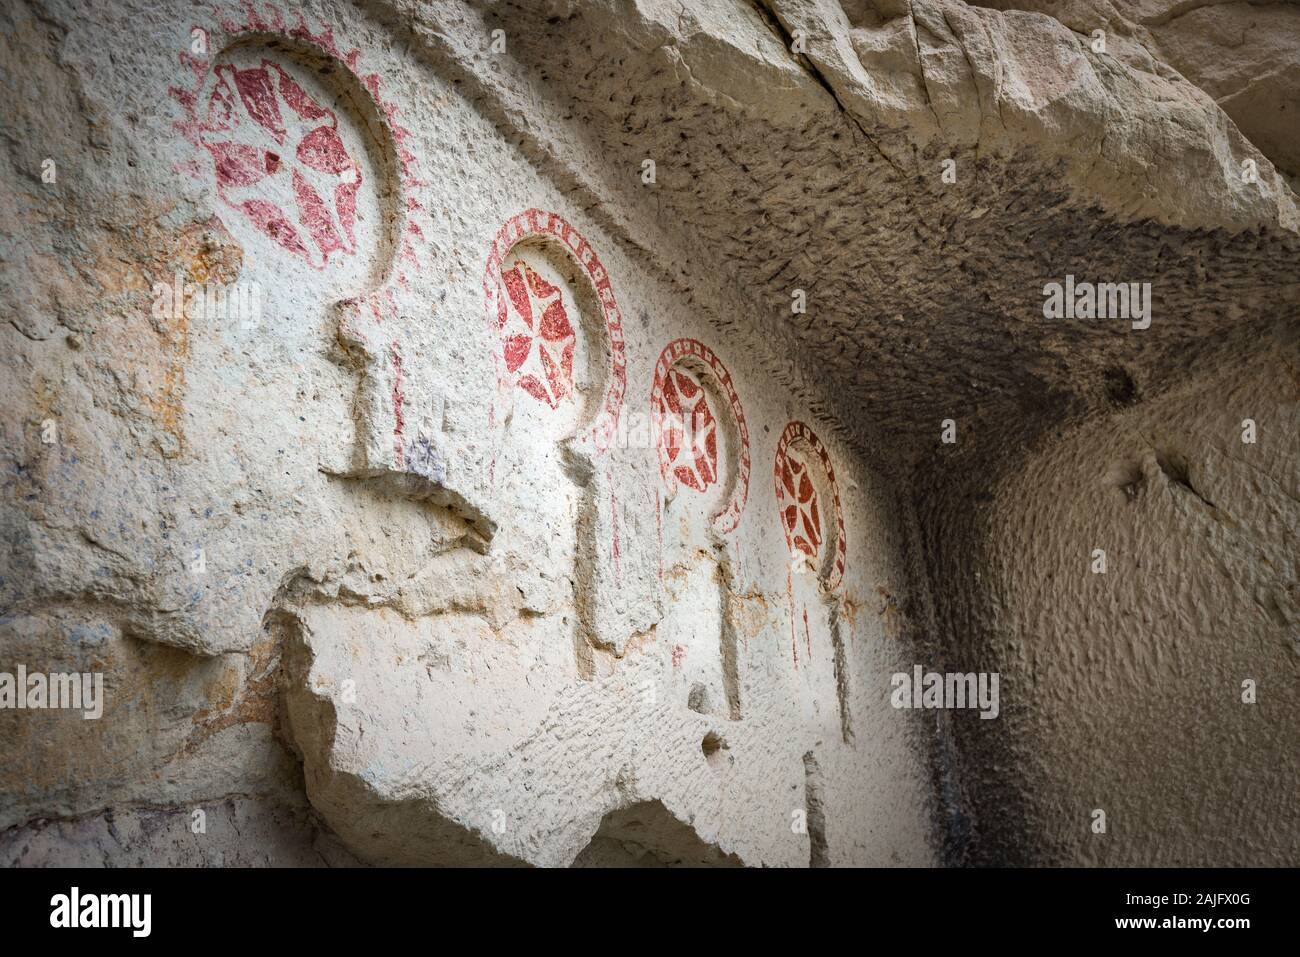 A row of Maltese crosses decorating the wall of an early Christian church in Goreme Open Air Museum (UNESCO heritage site) in Cappadocia, Turkey Stock Photo